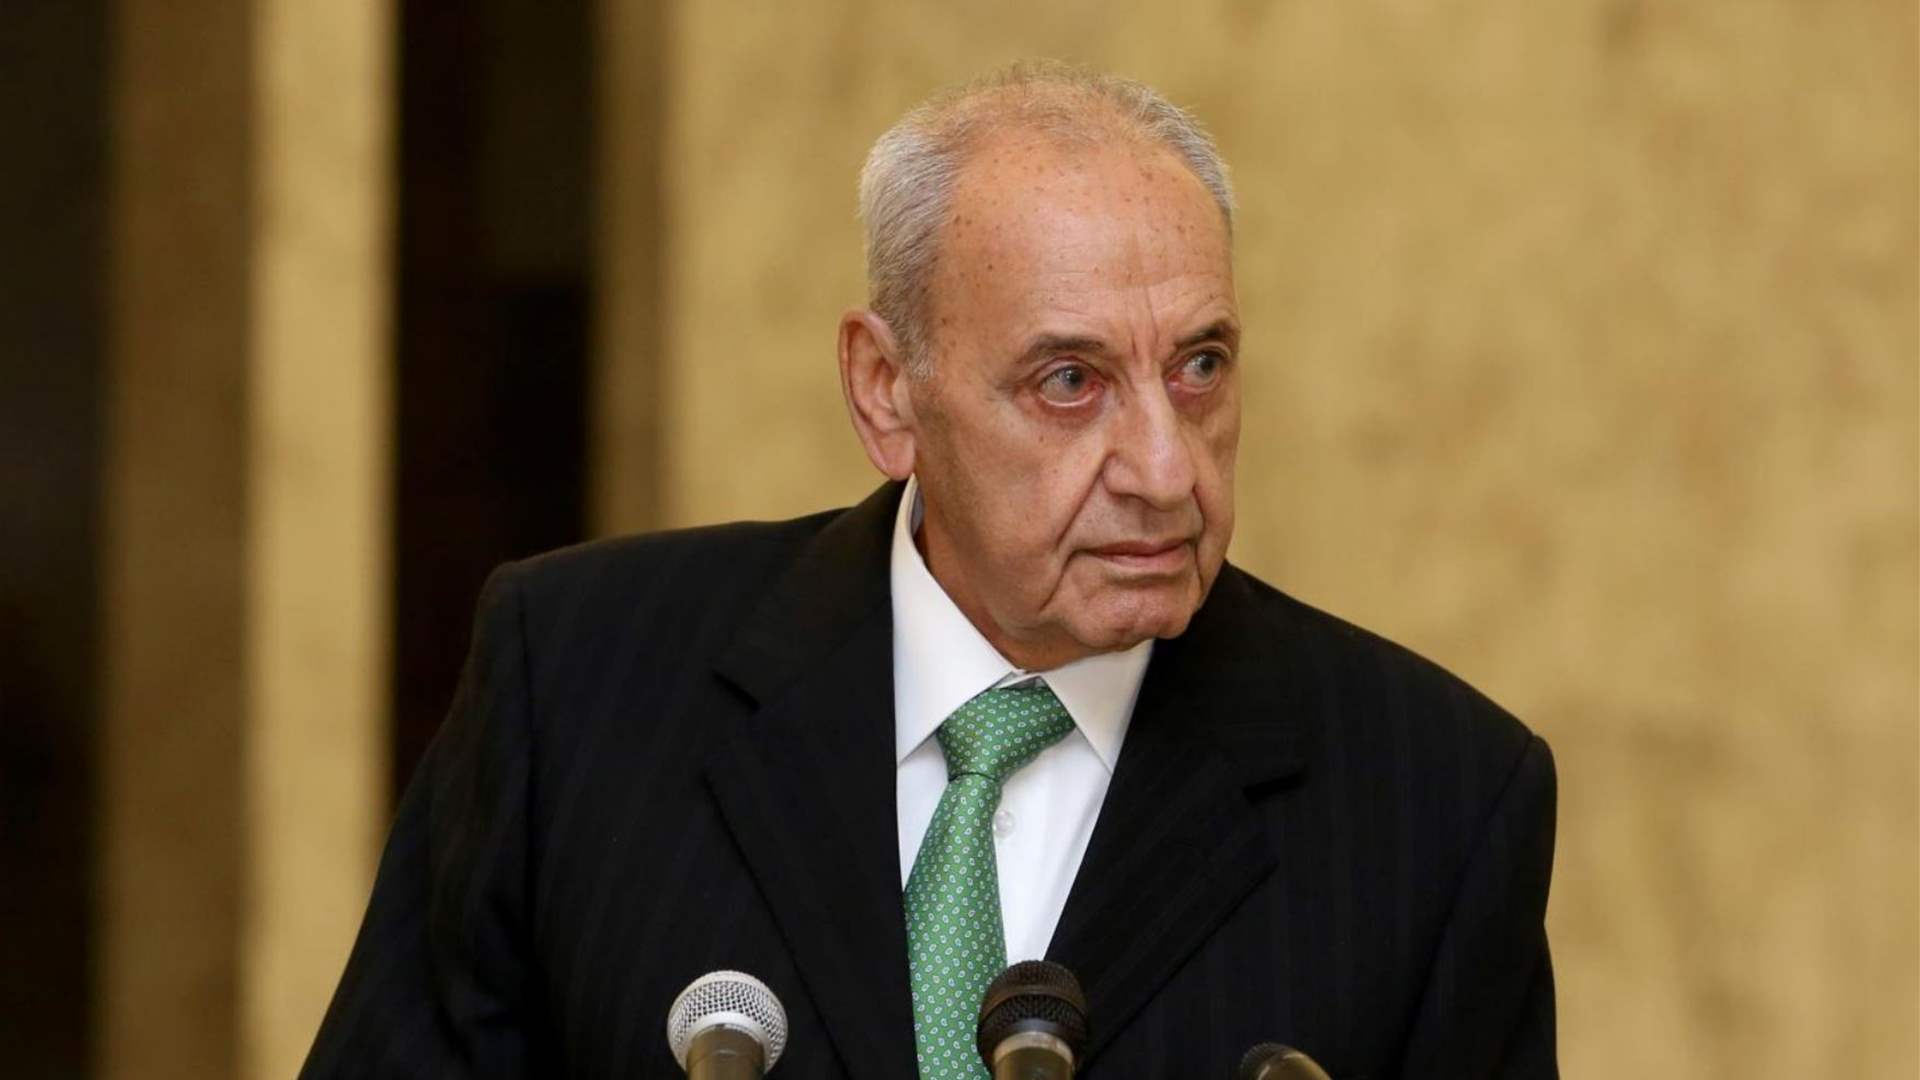 From French to Qatari initiative: Nabih Berri&#39;s presidential initiative faces growing challenges